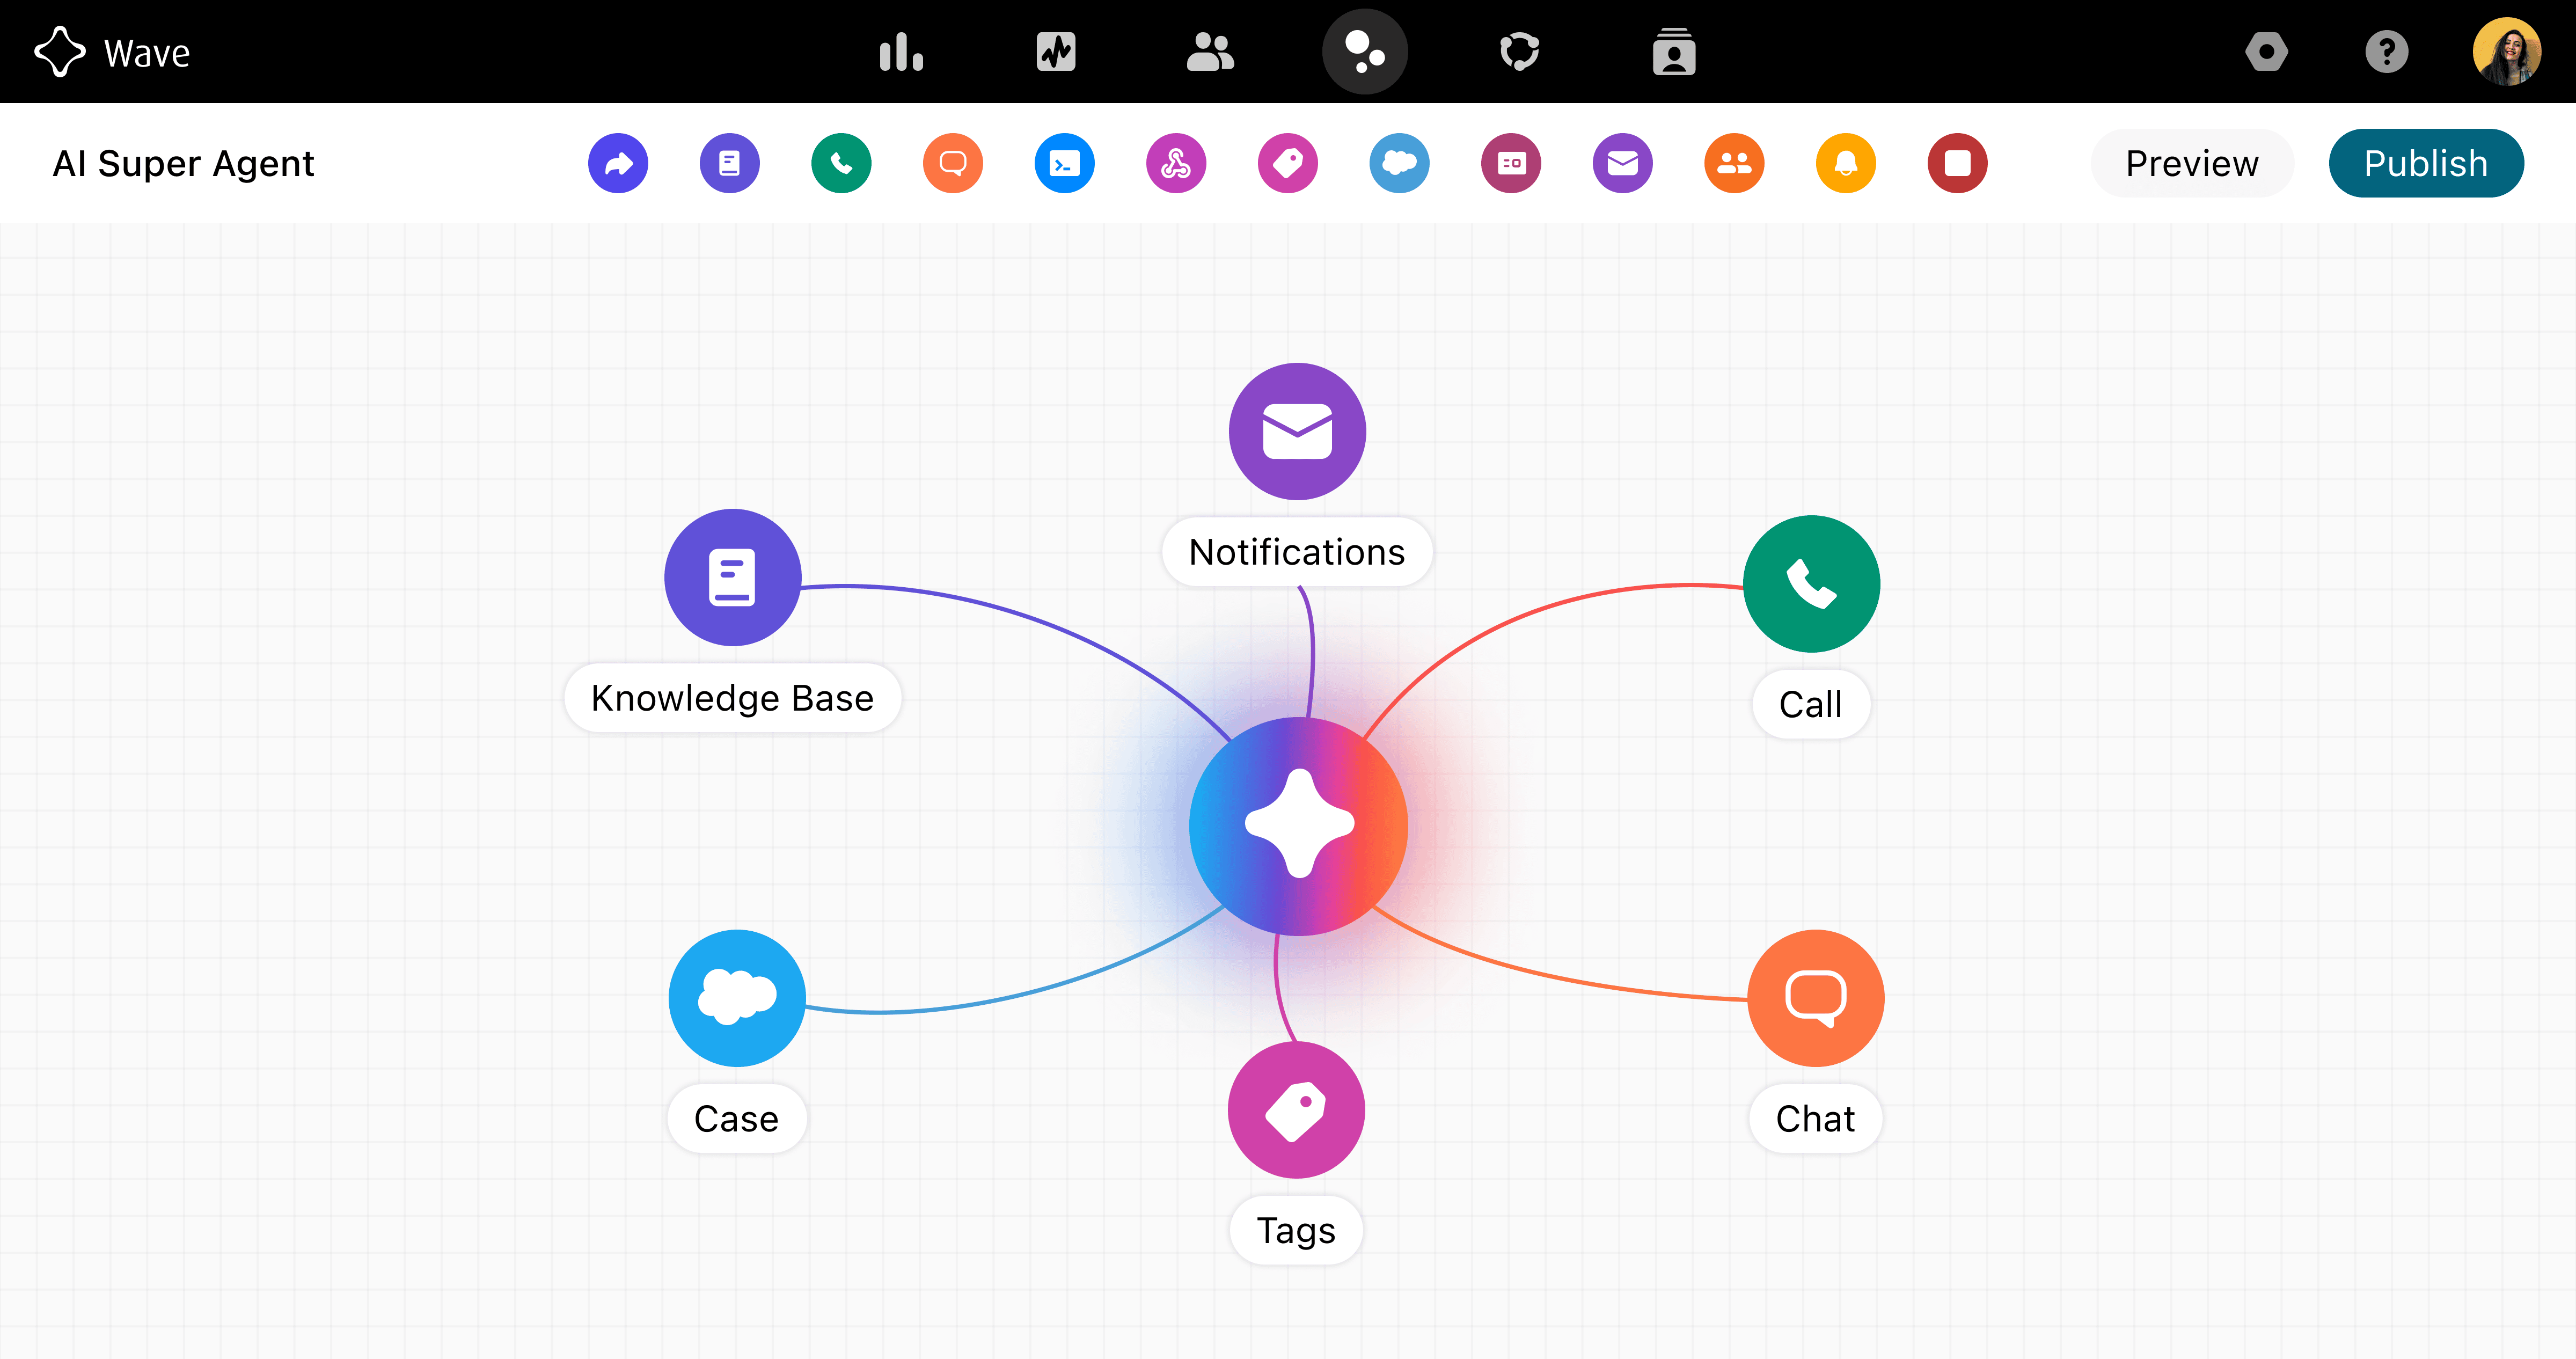 Illustration of an omnichannel contact center platform, with a vibrant central node representing Origon AI, and radial links to different service modules including voice calls, messaging, case management, and a knowledge database.